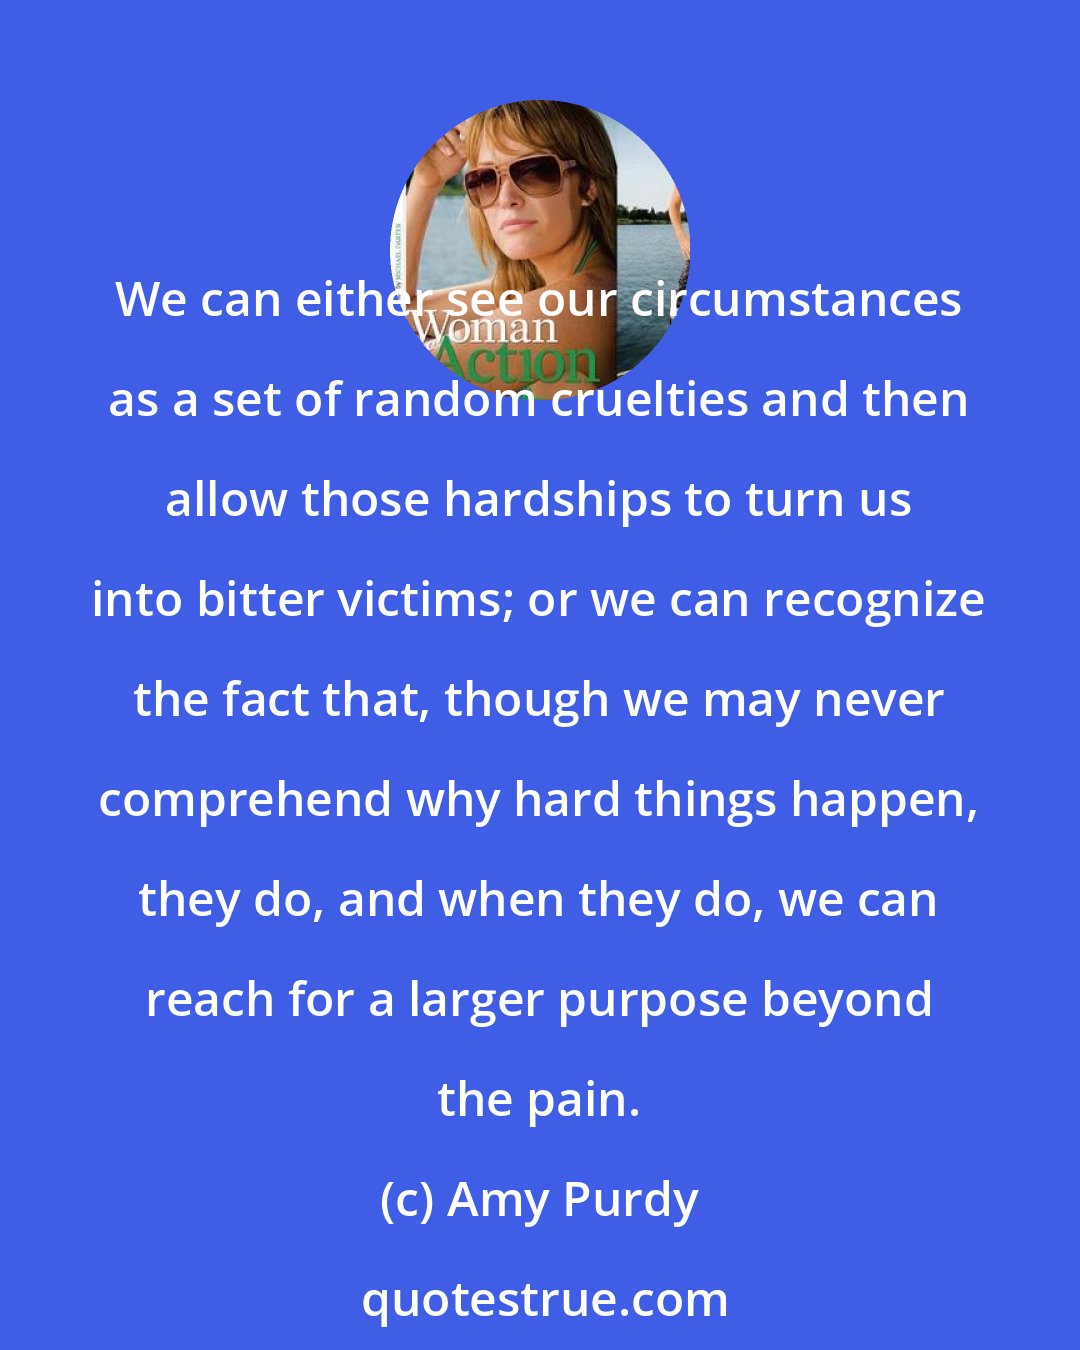 Amy Purdy: We can either see our circumstances as a set of random cruelties and then allow those hardships to turn us into bitter victims; or we can recognize the fact that, though we may never comprehend why hard things happen, they do, and when they do, we can reach for a larger purpose beyond the pain.